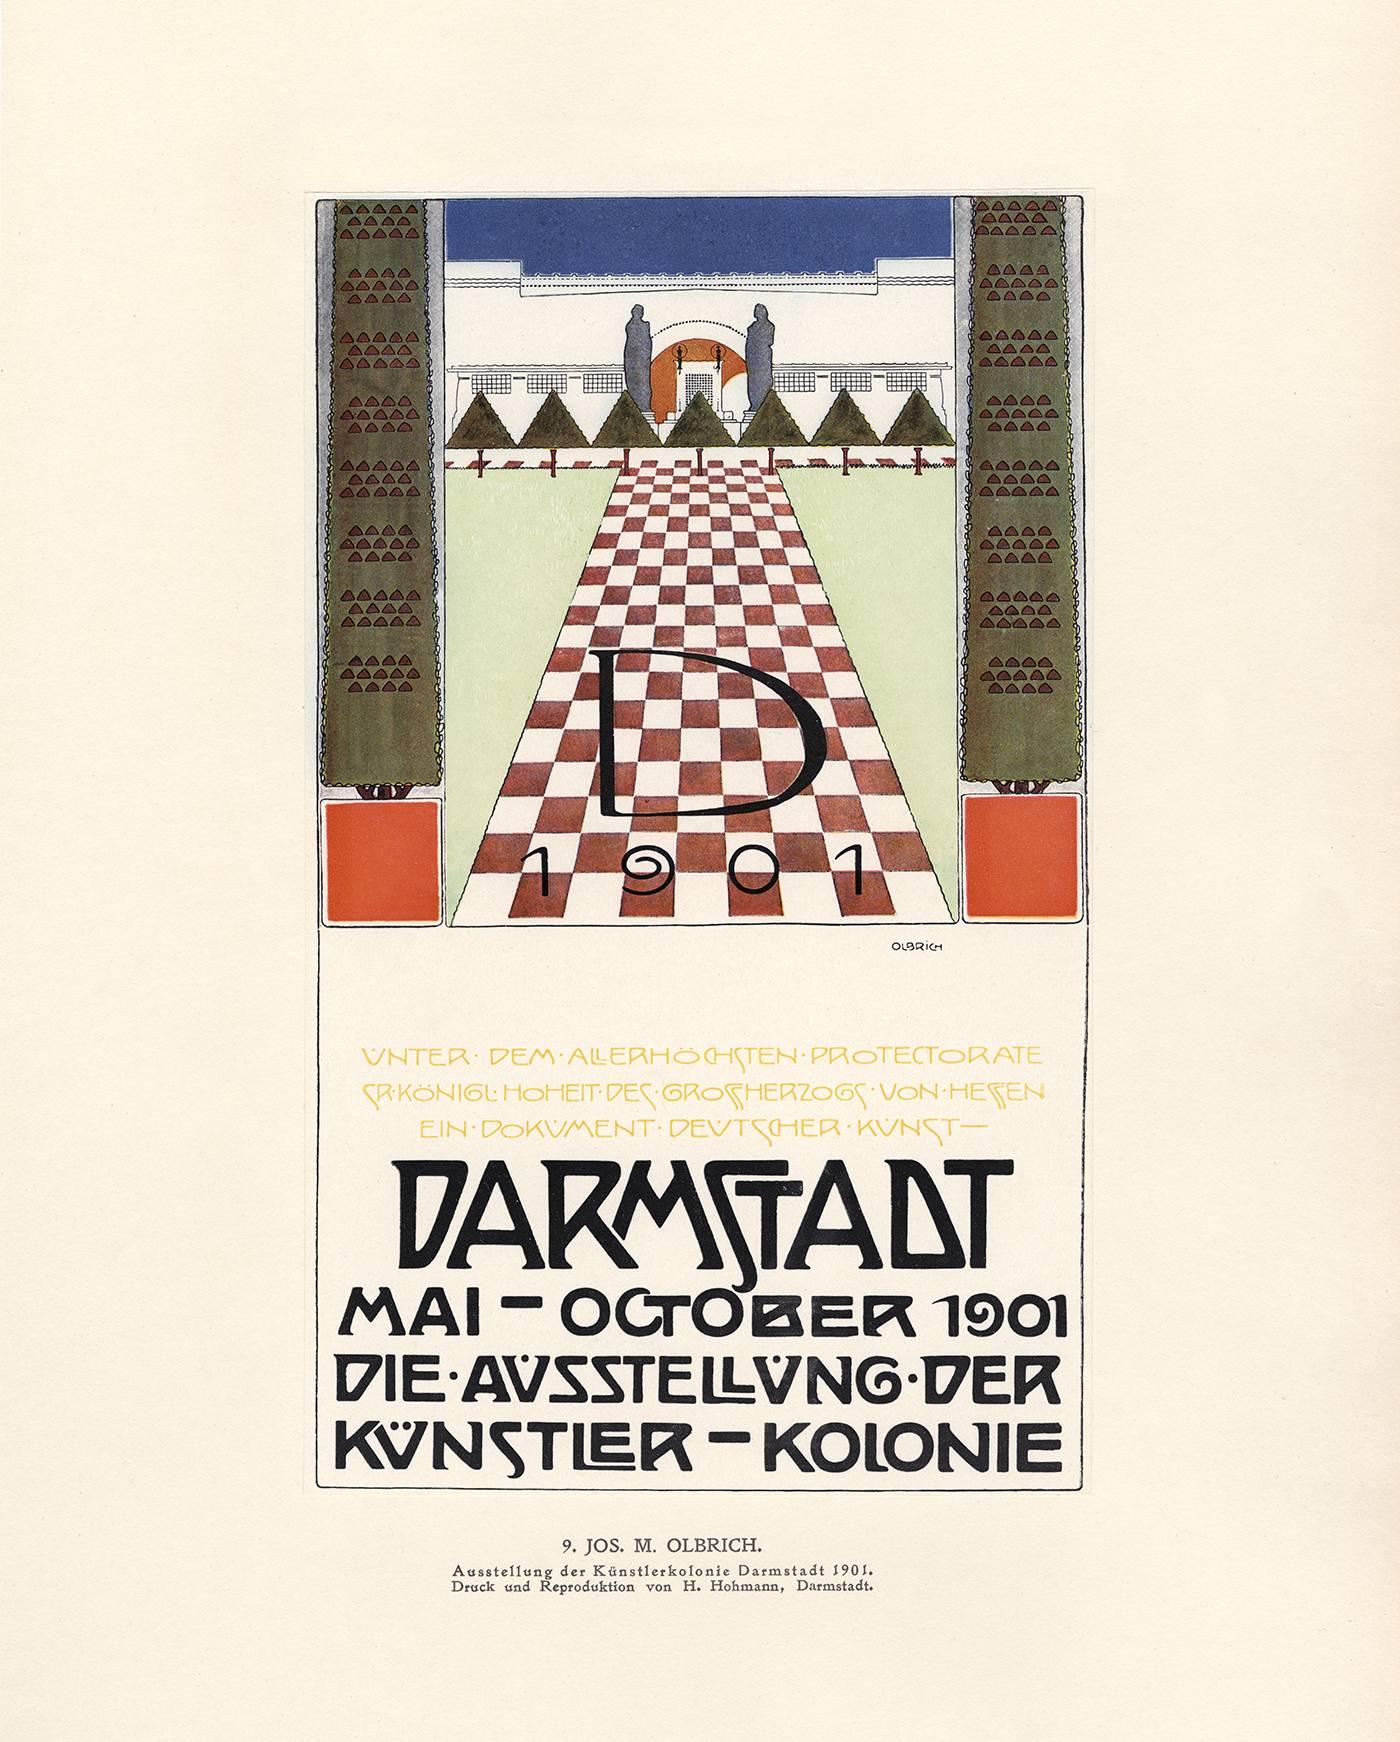 After JOSEPH MARIA OLBRICHT (1867-1908) DARMSTADT POSTER, 1901, (In Mascha, no. 9) One of the founding members of the Vienna Secession and a highly esteemed architect, Olbricht was charged with designing the group’s permanent exhibition hall which